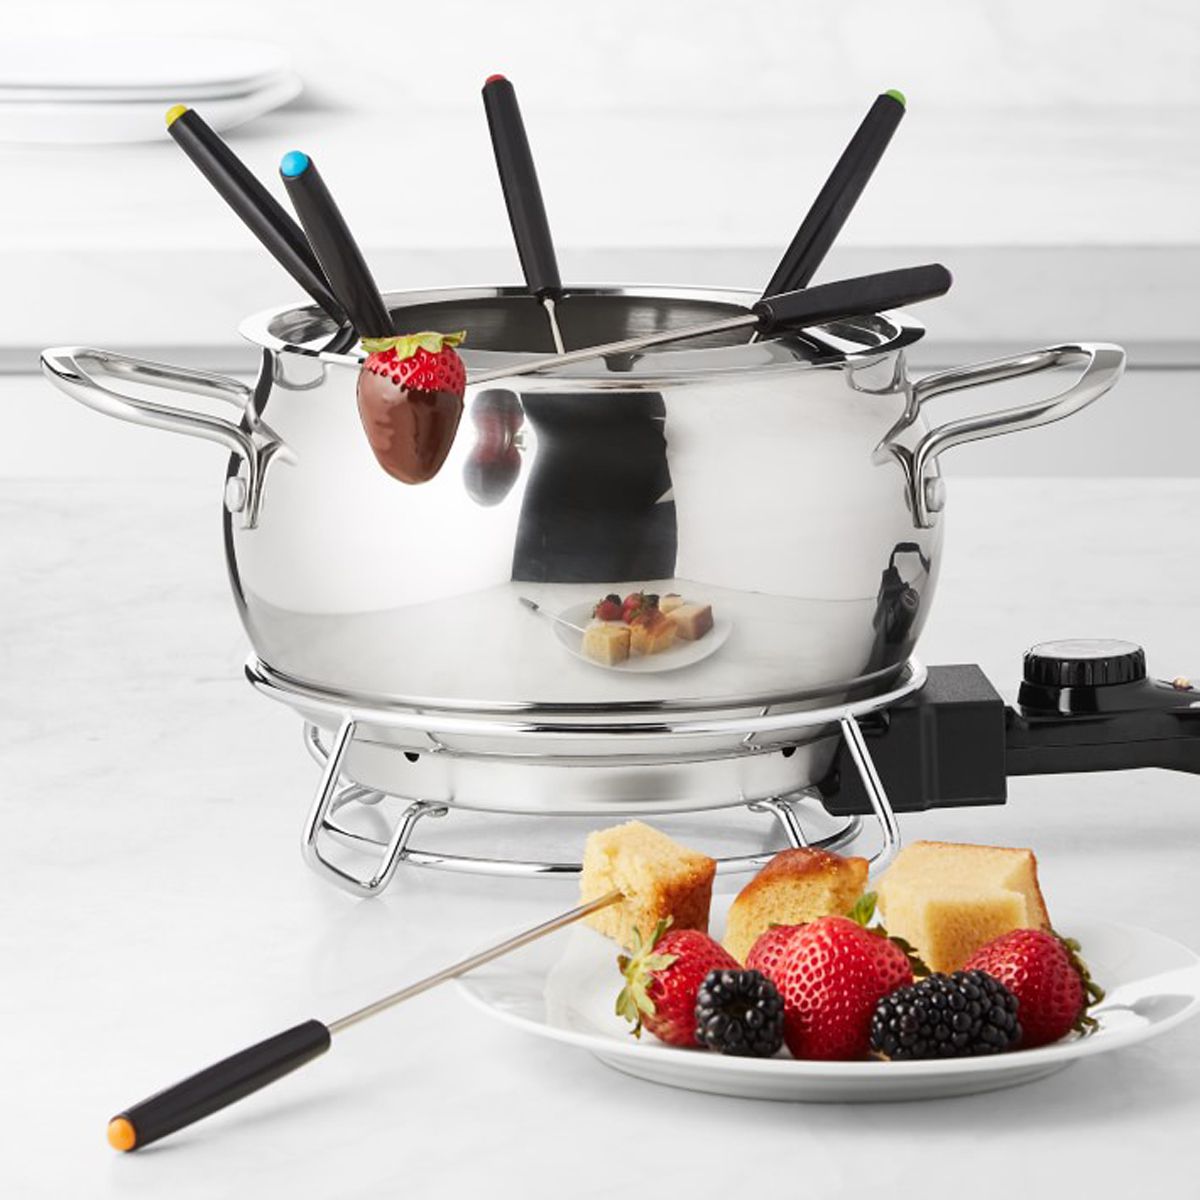 Ceramic Cheese Melting Pot Diameter 10cm N / B Chocolate Fondue Suitable for Home For Home Kitchen Hotels Shops Restaurants Restaurant and Café